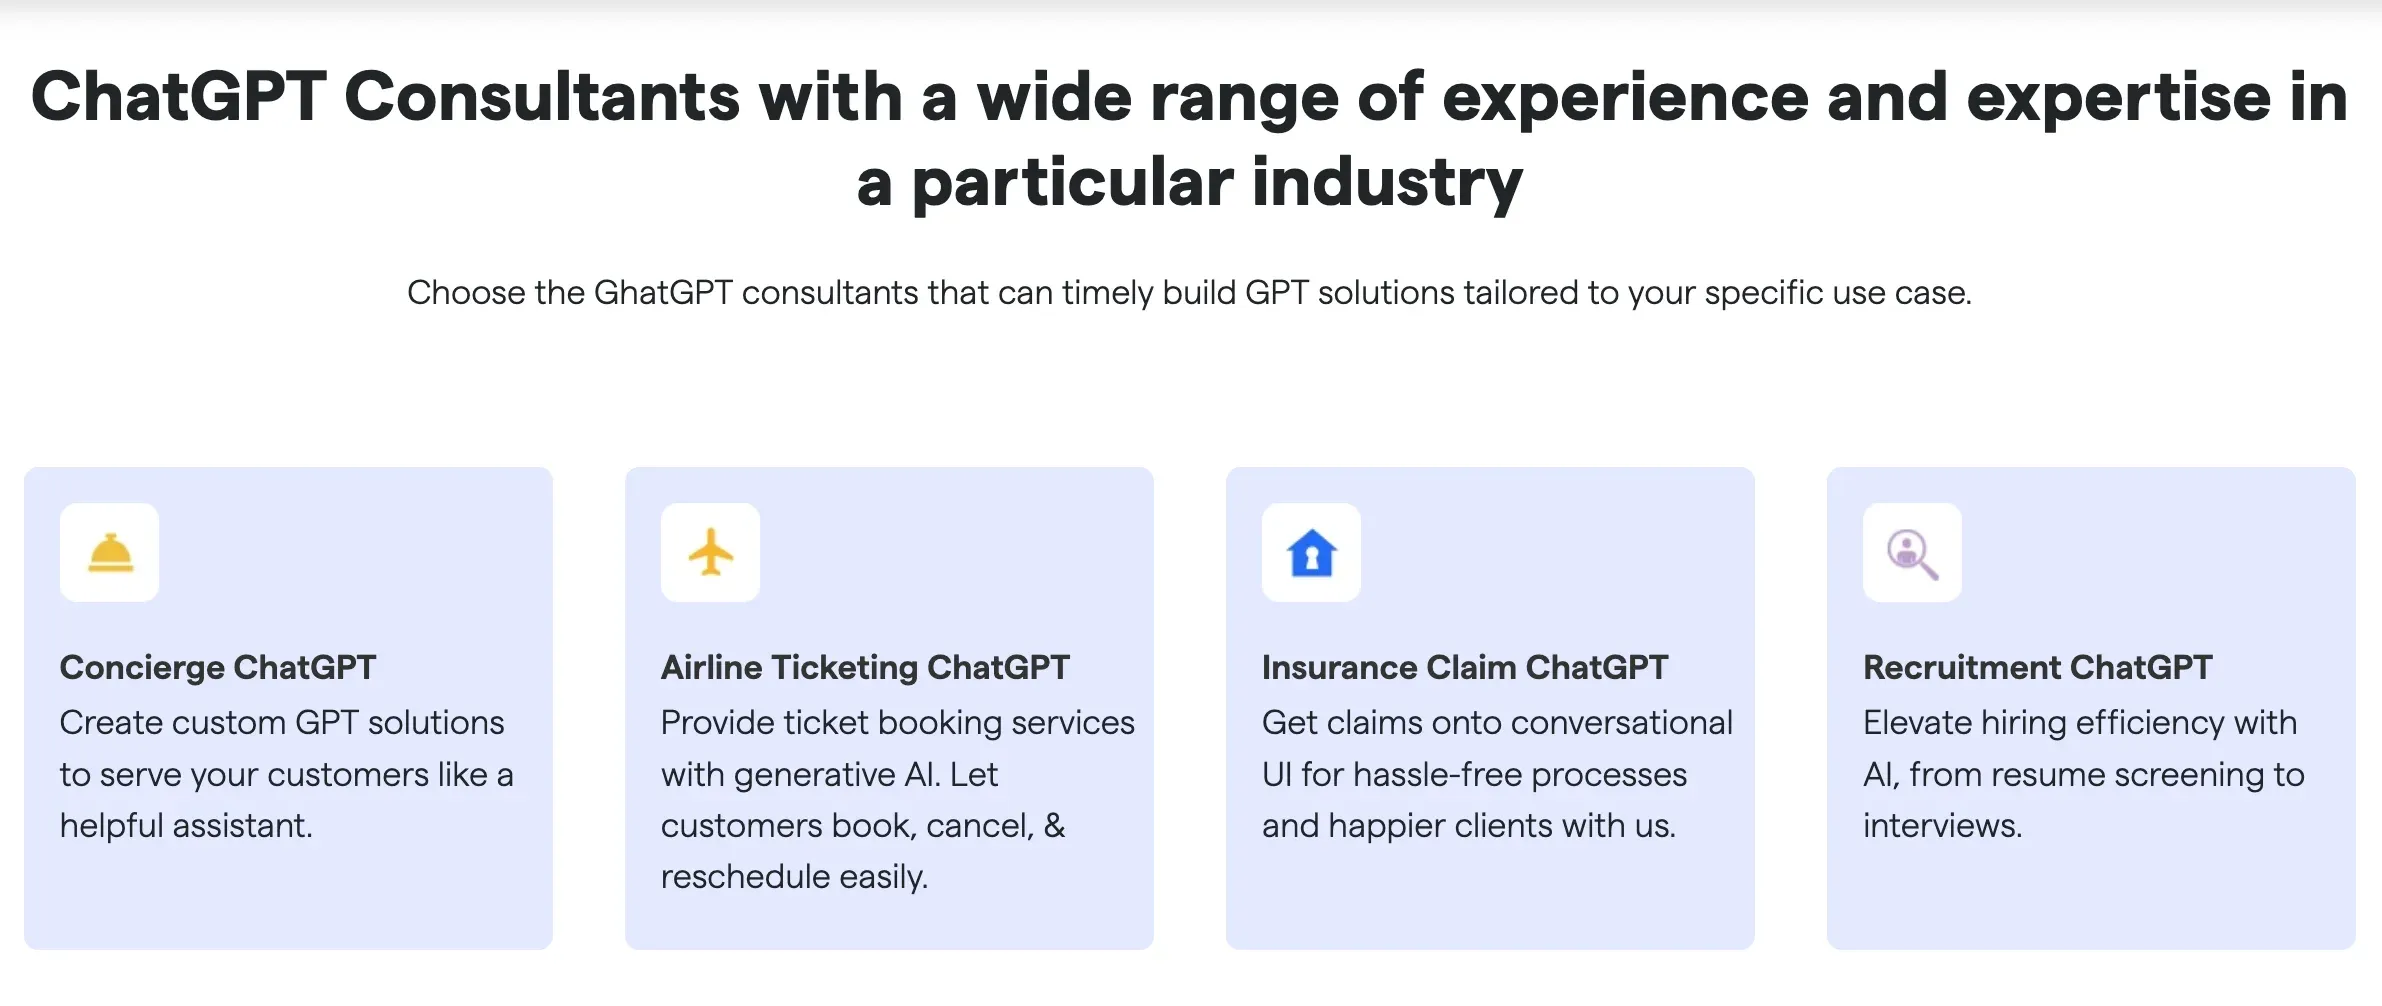 When to Consider BotPenguin's Expert ChatGPT Consultants?